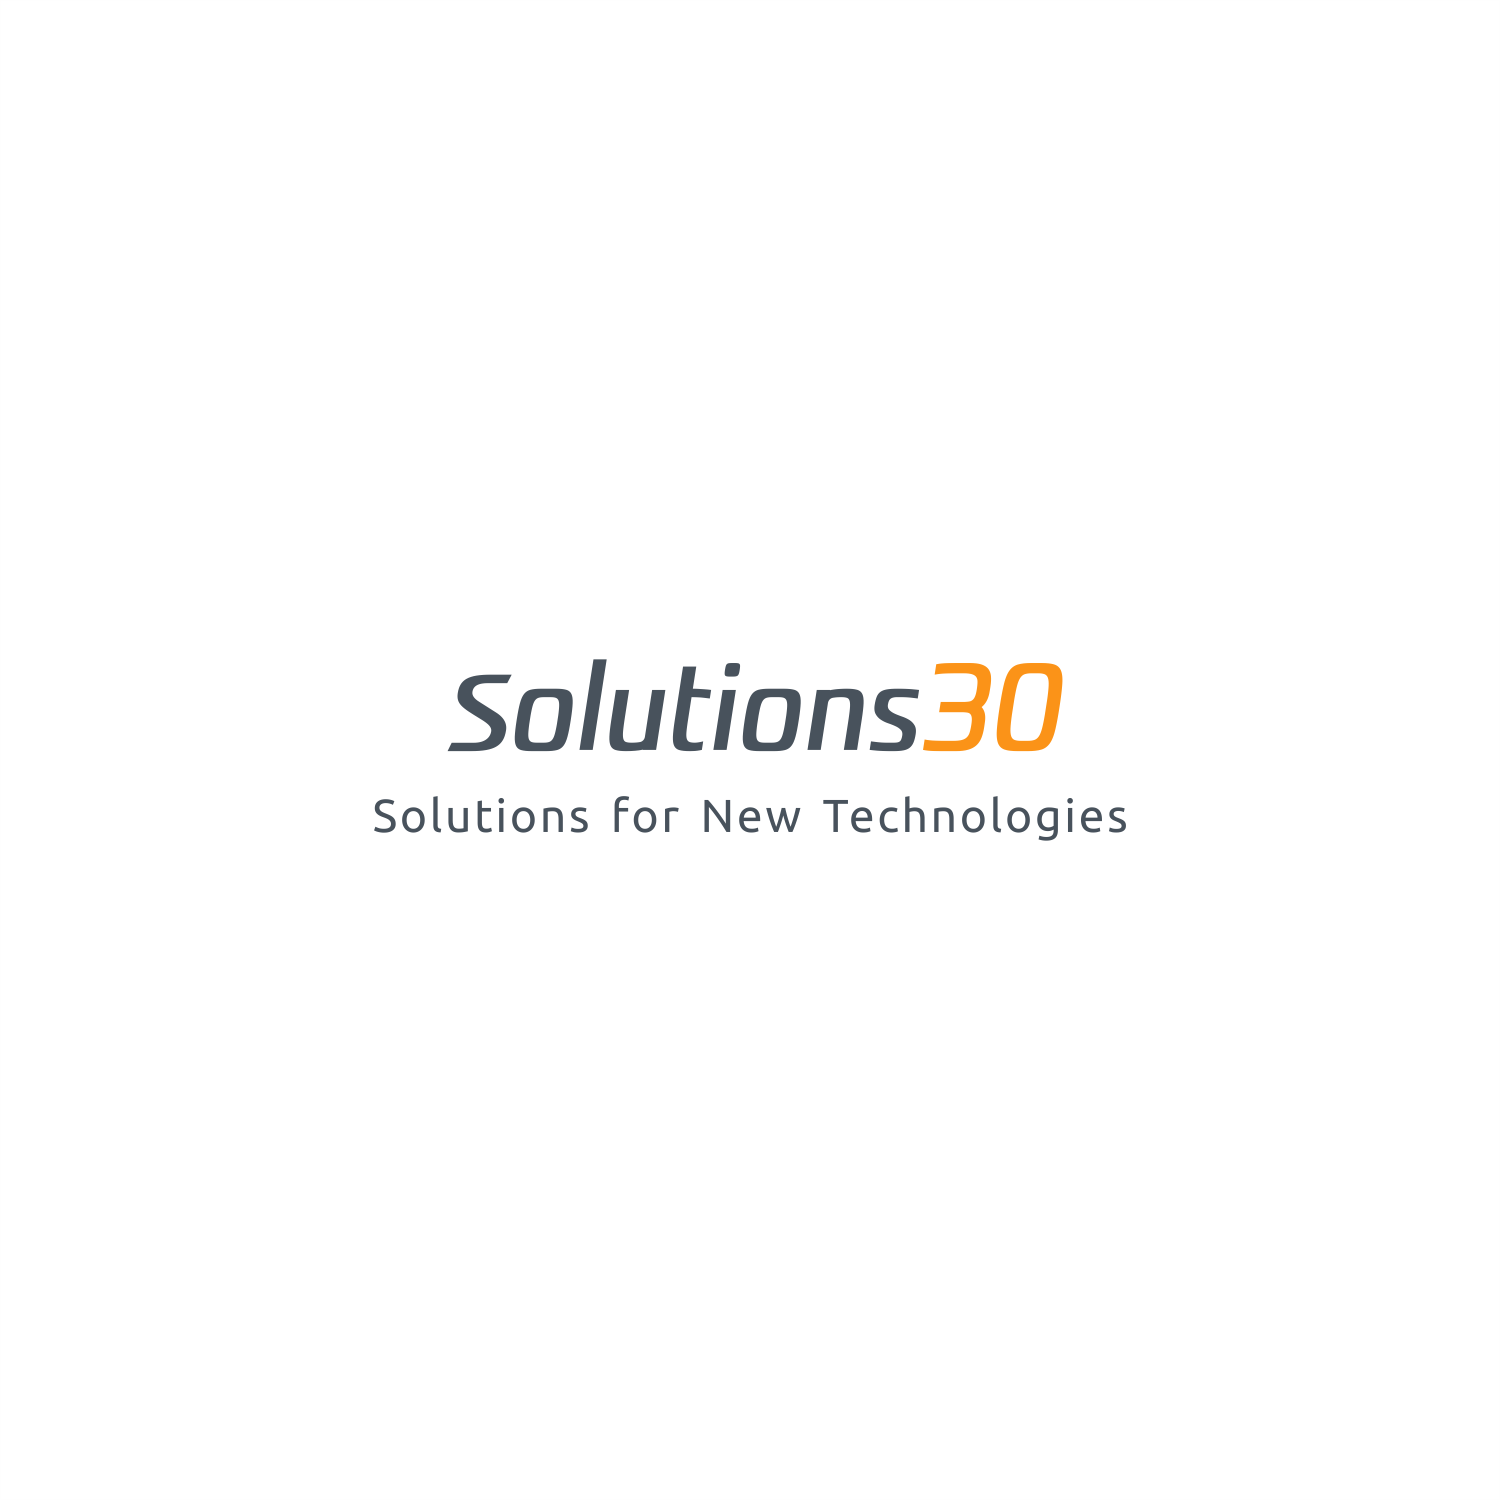 Solutions30 announce